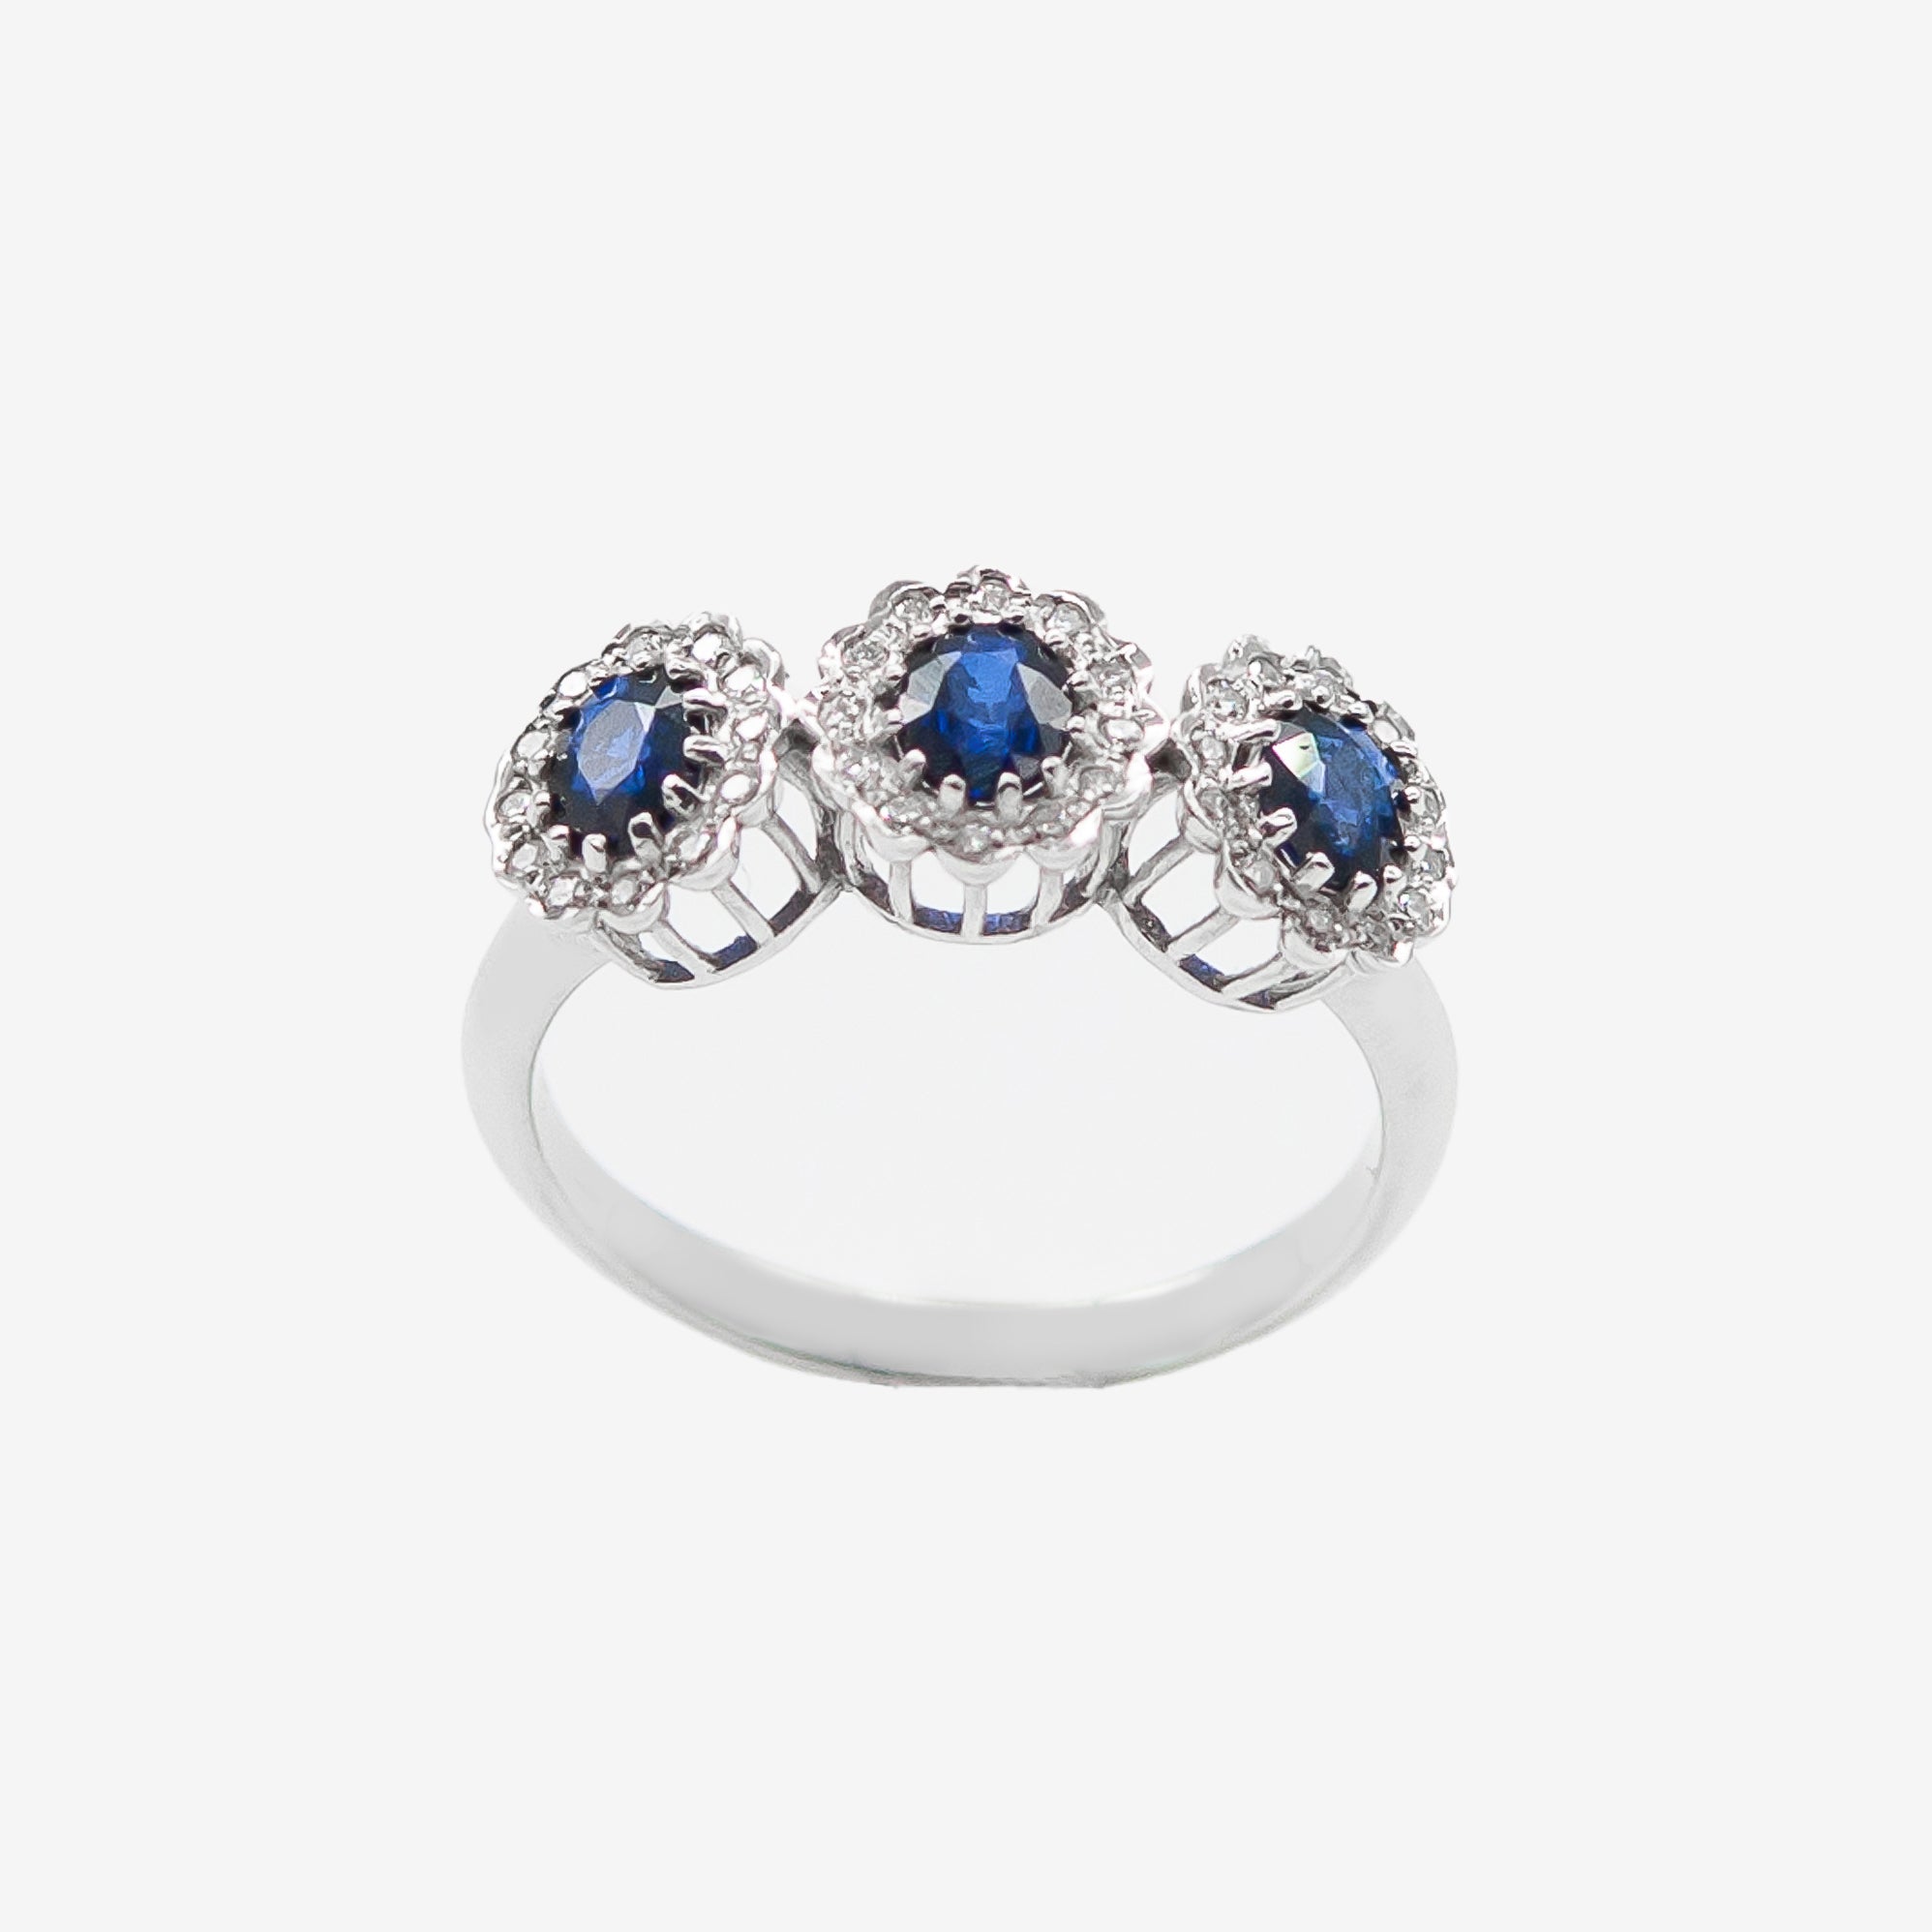 Dili ring with sapphires and diamonds